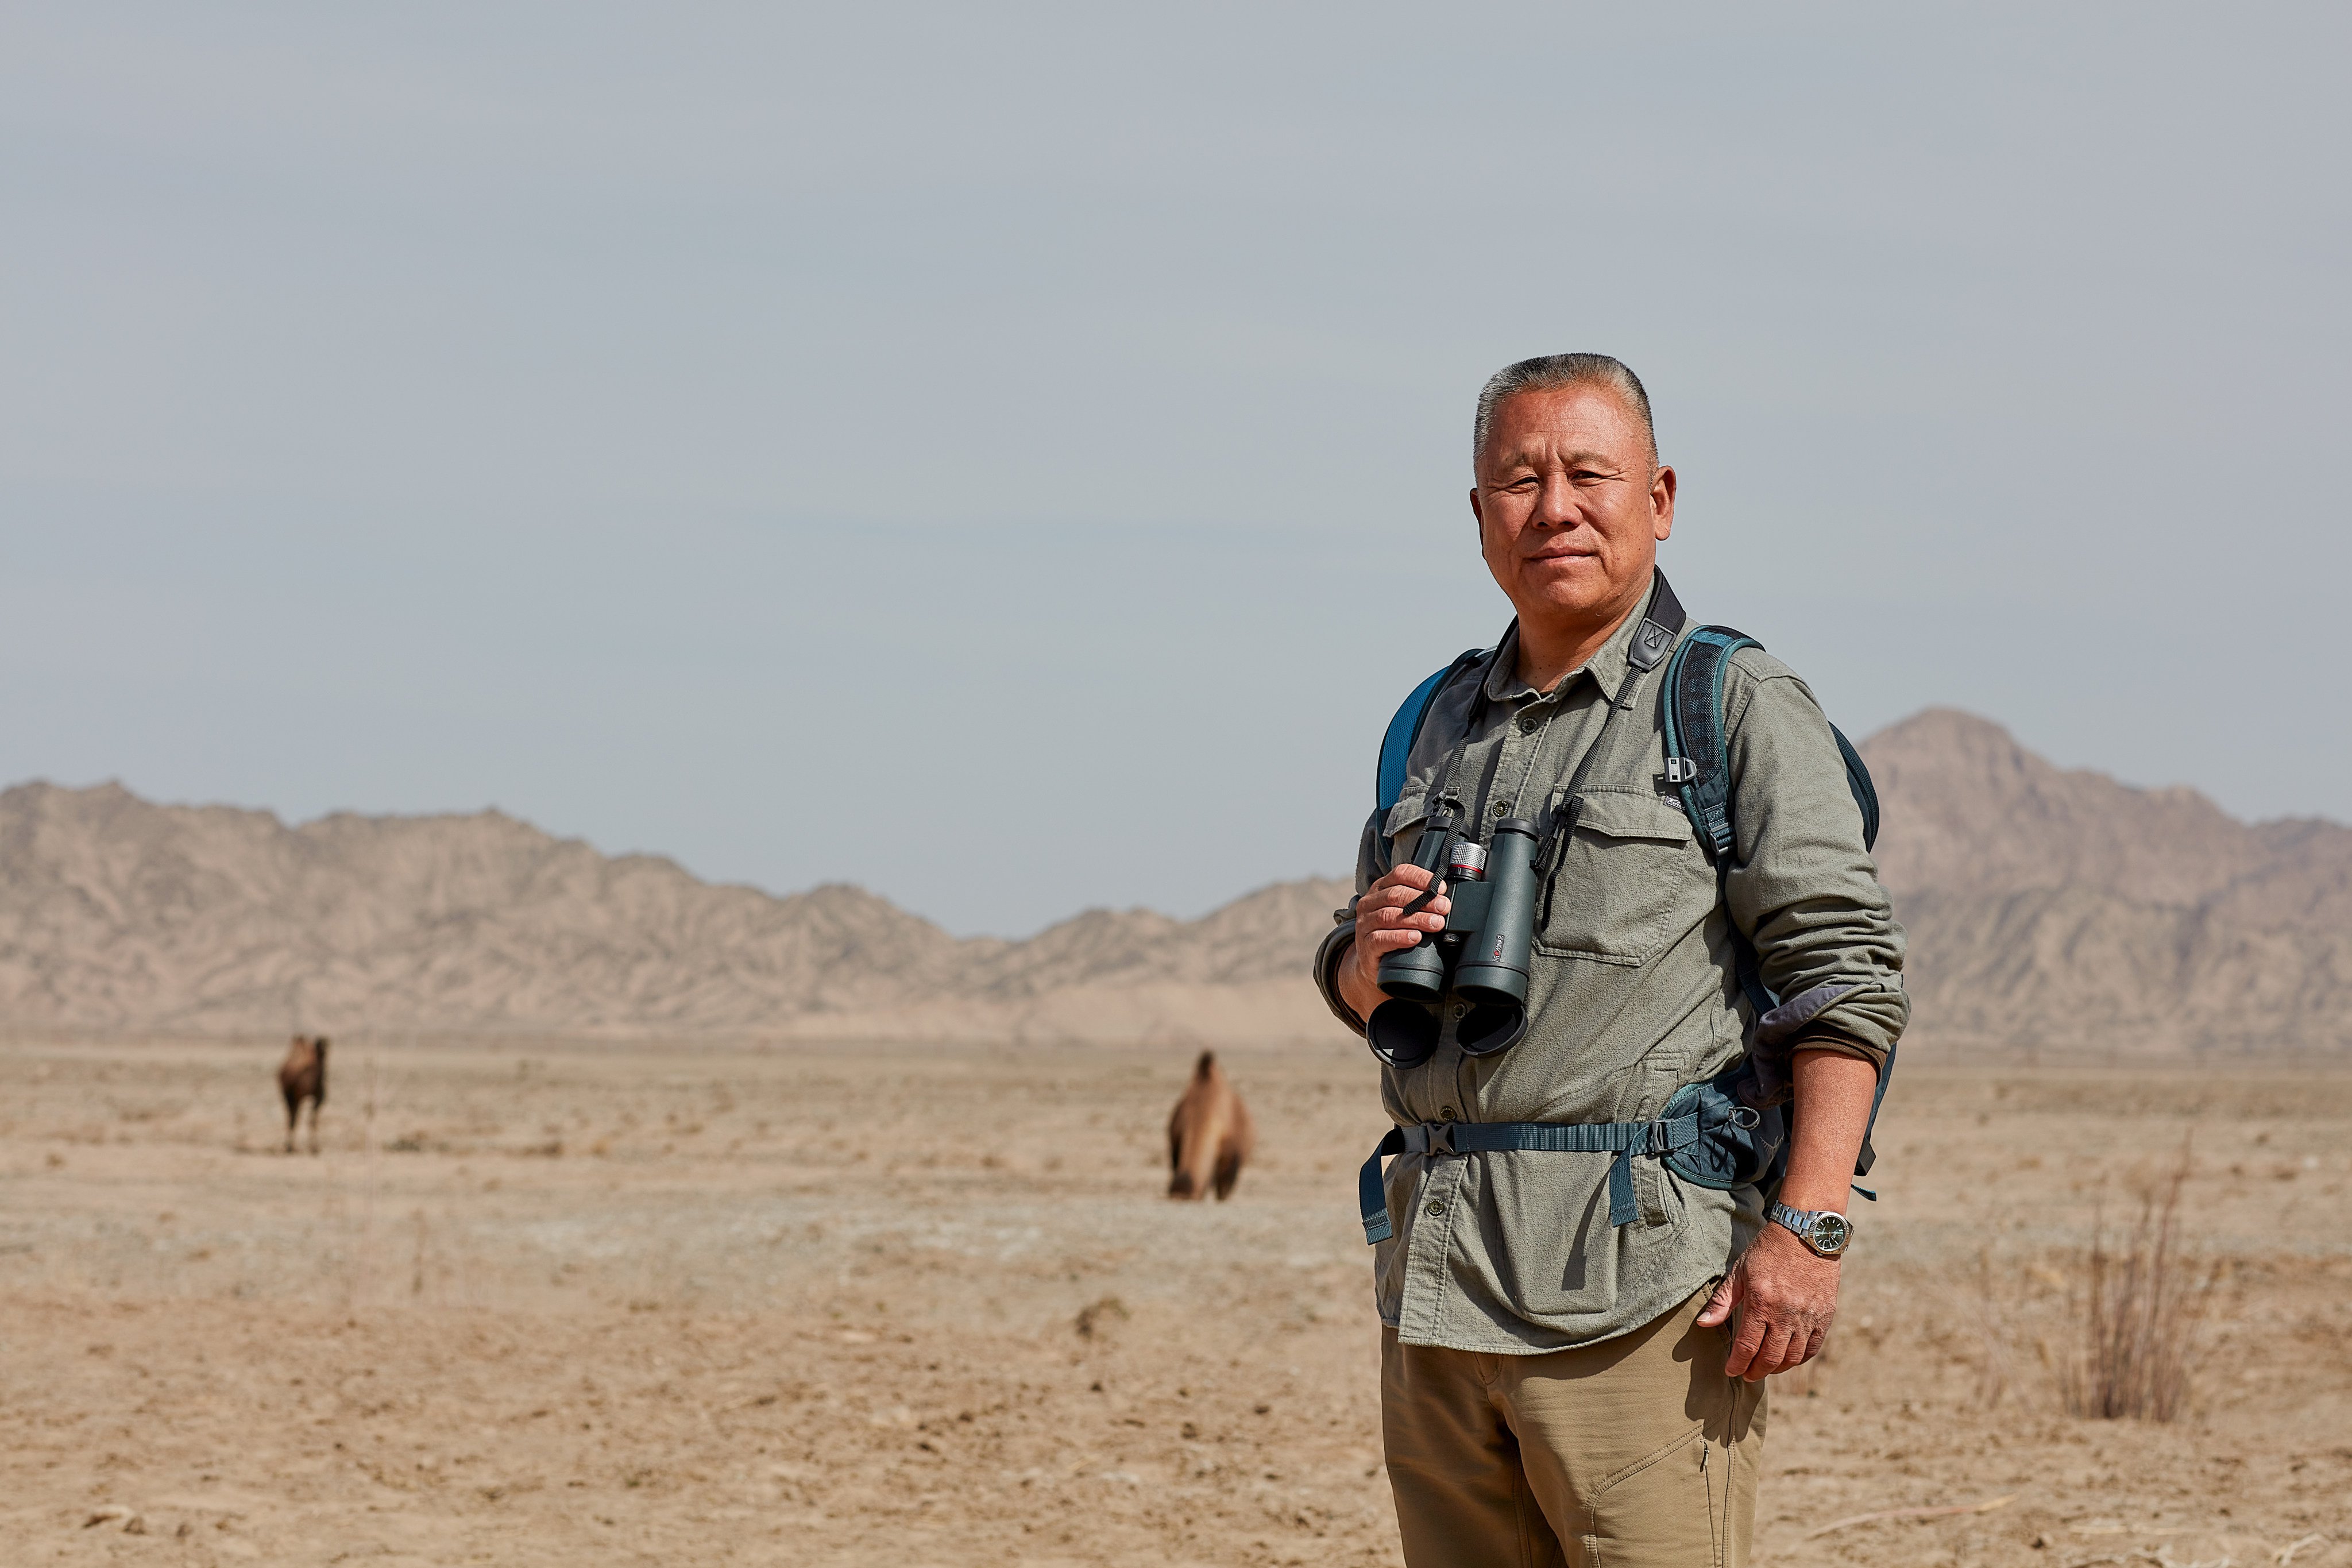 Rolex Awards for Enterprise laureate Liu Shaochuang is a Chinese remote sensing specialist on a mission to save one of Asia’s last large wild animals, the wild camel. Photos: Handout